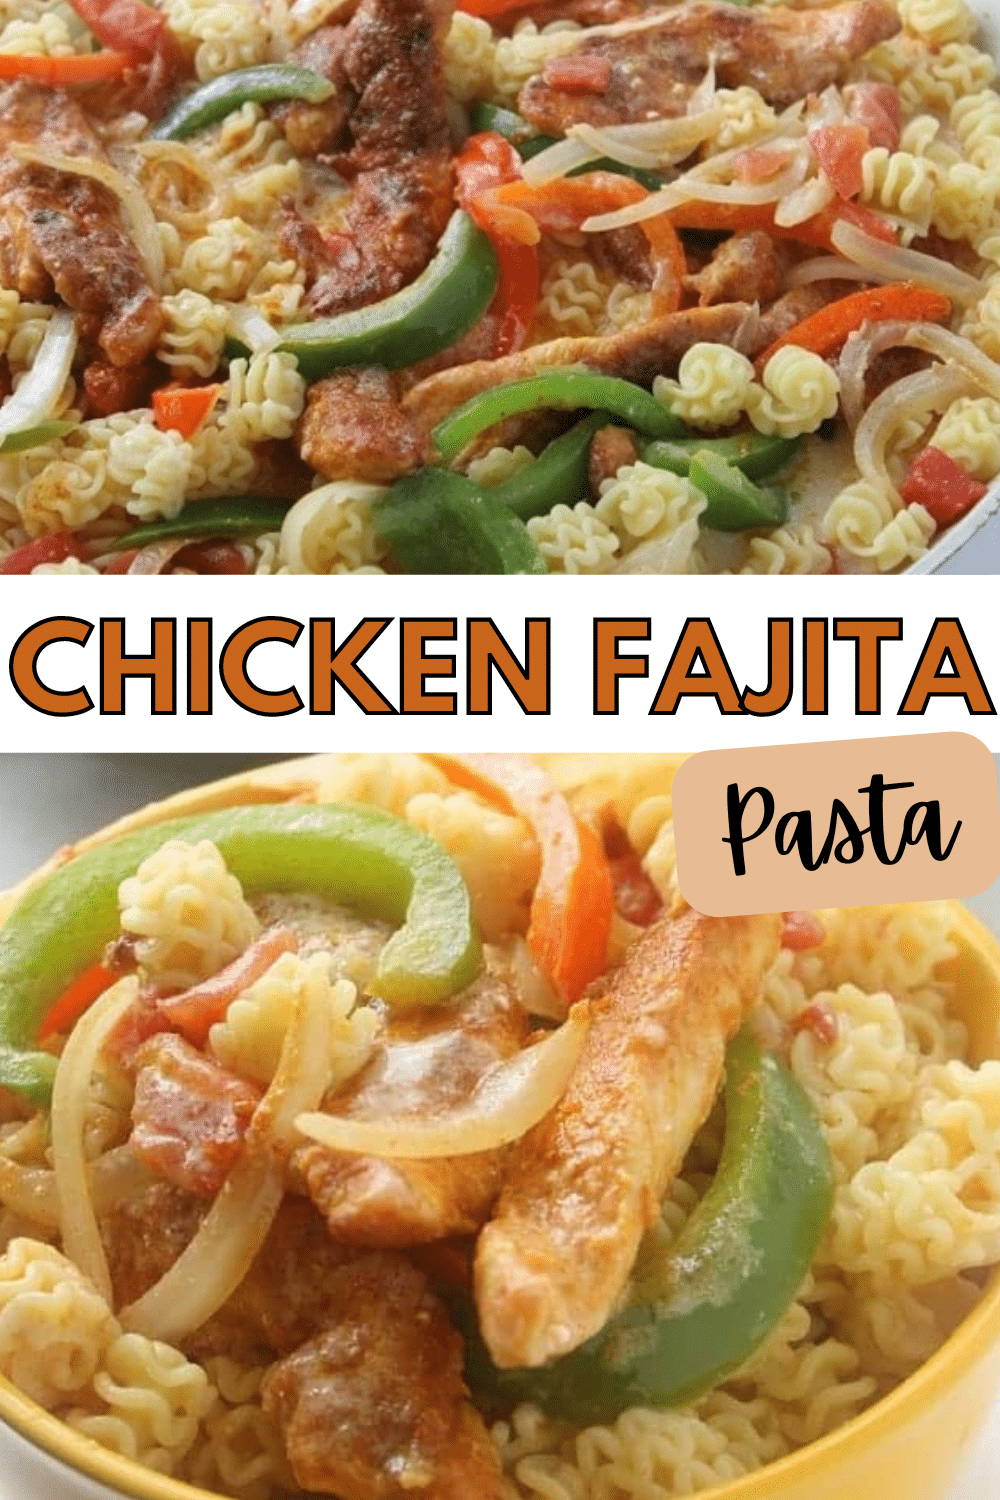 This Chicken Fajita Pasta combines the best of both worlds - delicious Mexican flavor in the convenience of a pasta dish! #chickenfajita #pasta #mexicanfood #dinner via @wondermomwannab